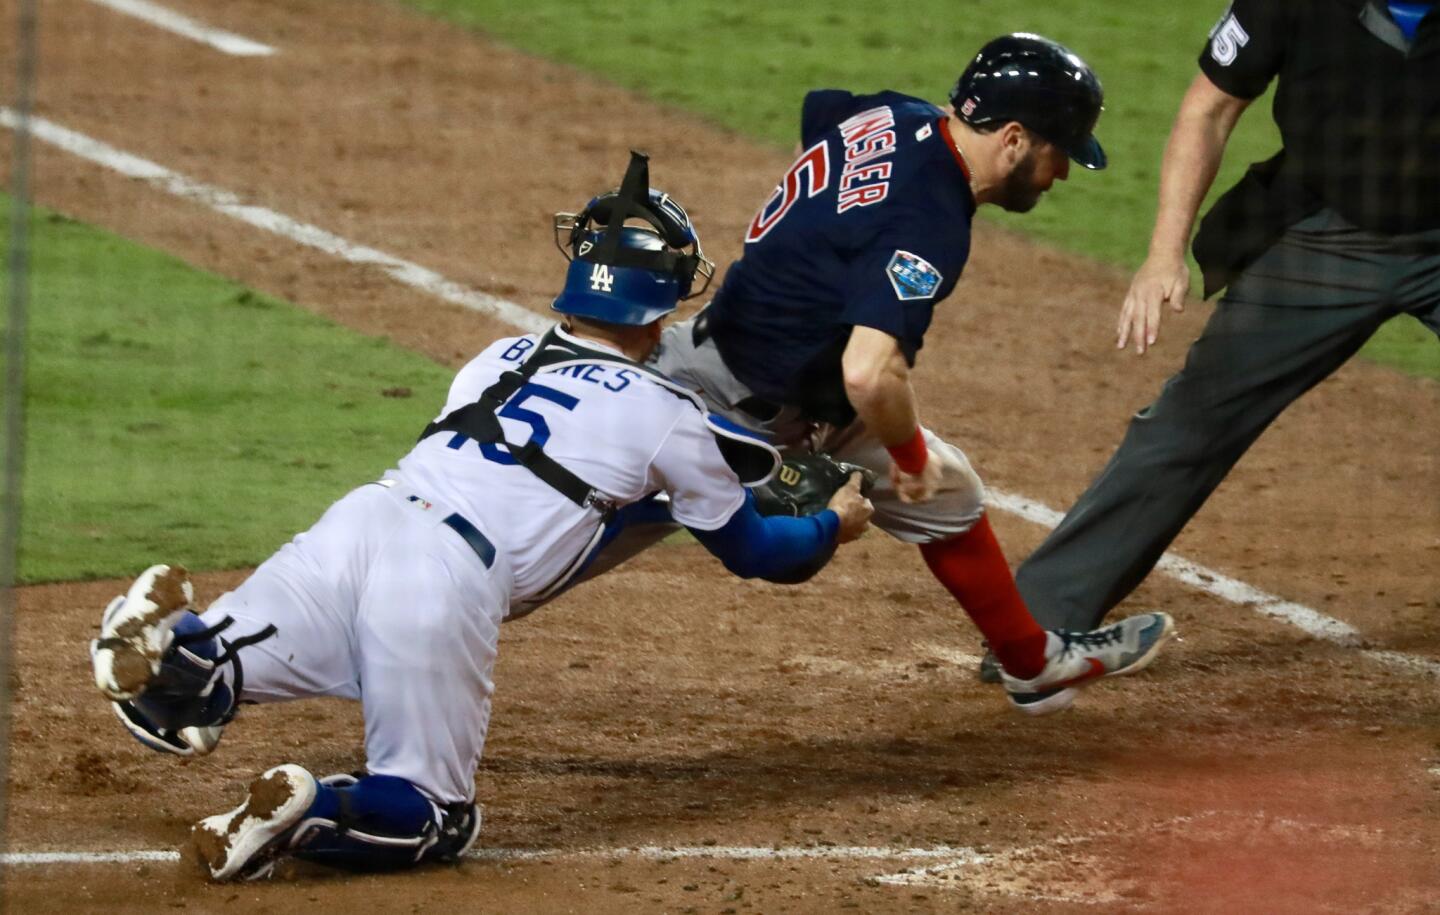 Red Sox's Ian Kinsler is tagged out by Los Angeles Dodgers' Austin Barnes at home plate while trying to score on a sacrifice fly by Eduardo Nunez during the 10th inning.